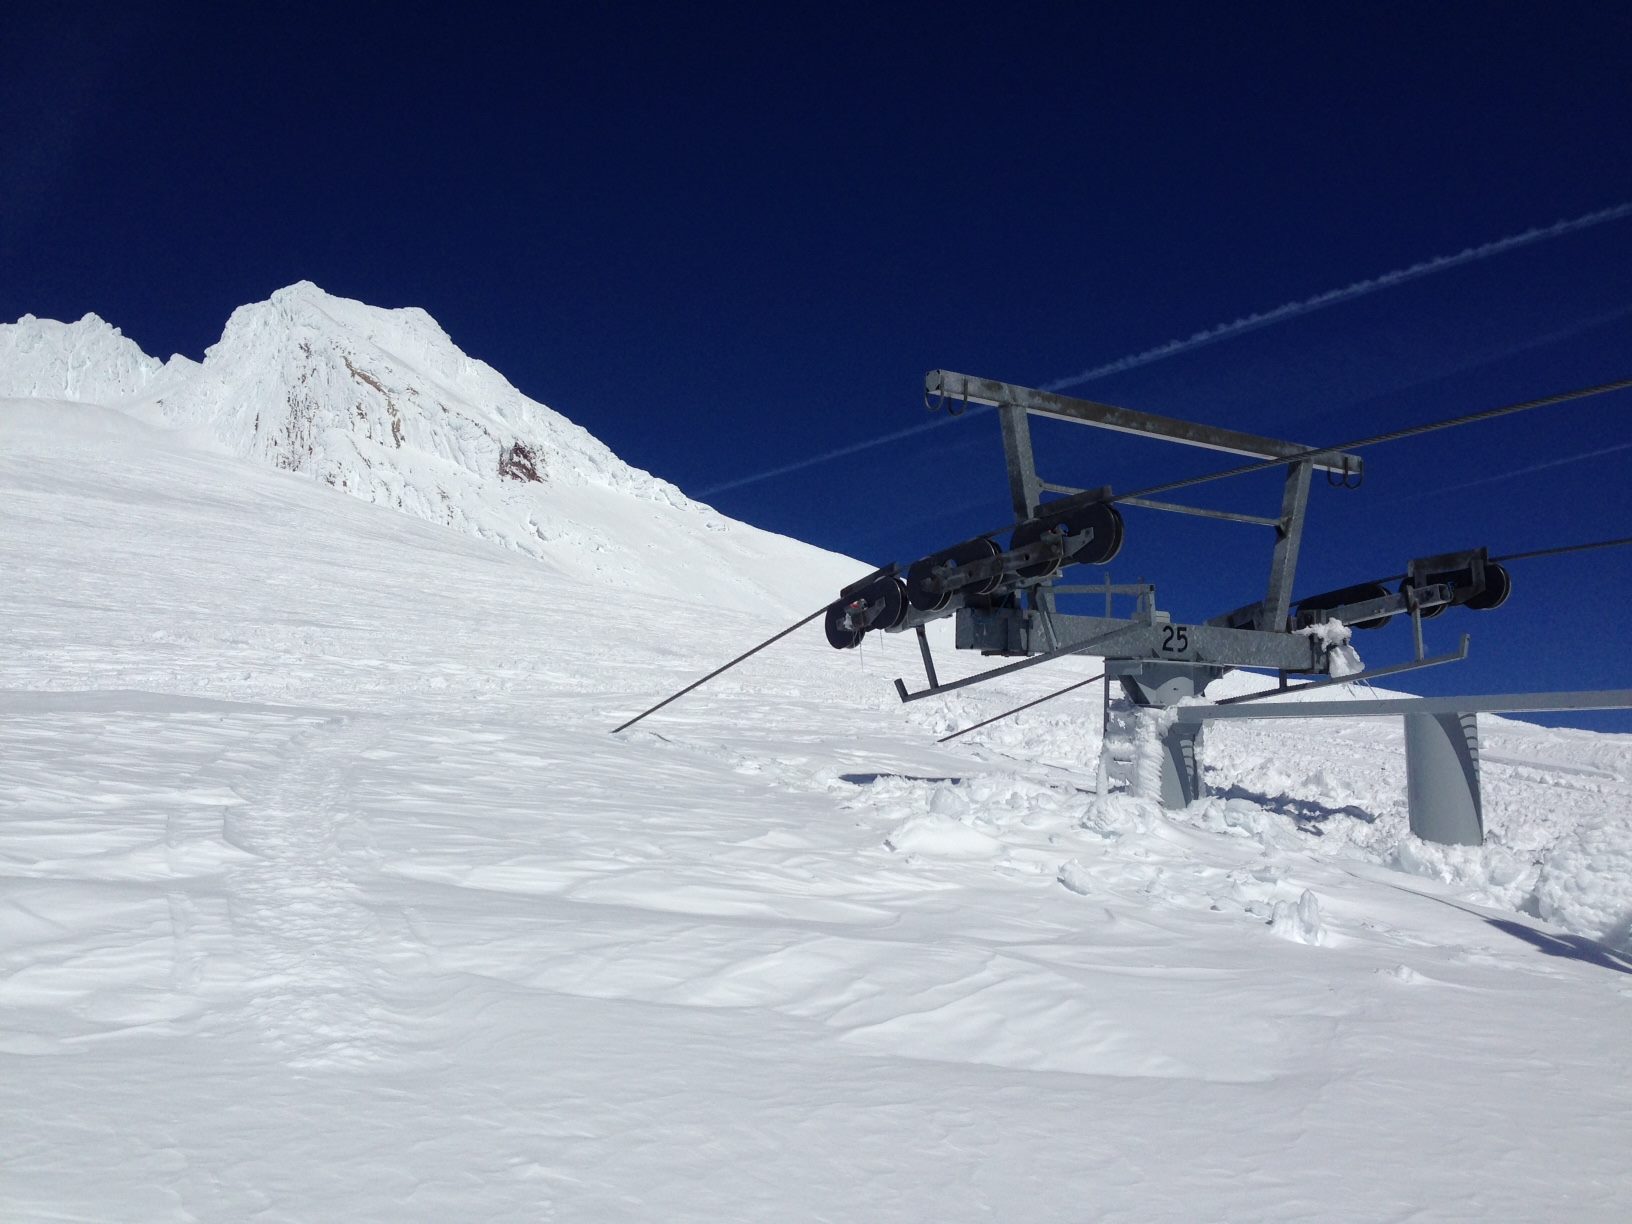 Palmer Chairlift, Mt. Hood, OR on March 17th, 2016.  photo:  Timberline ski resort